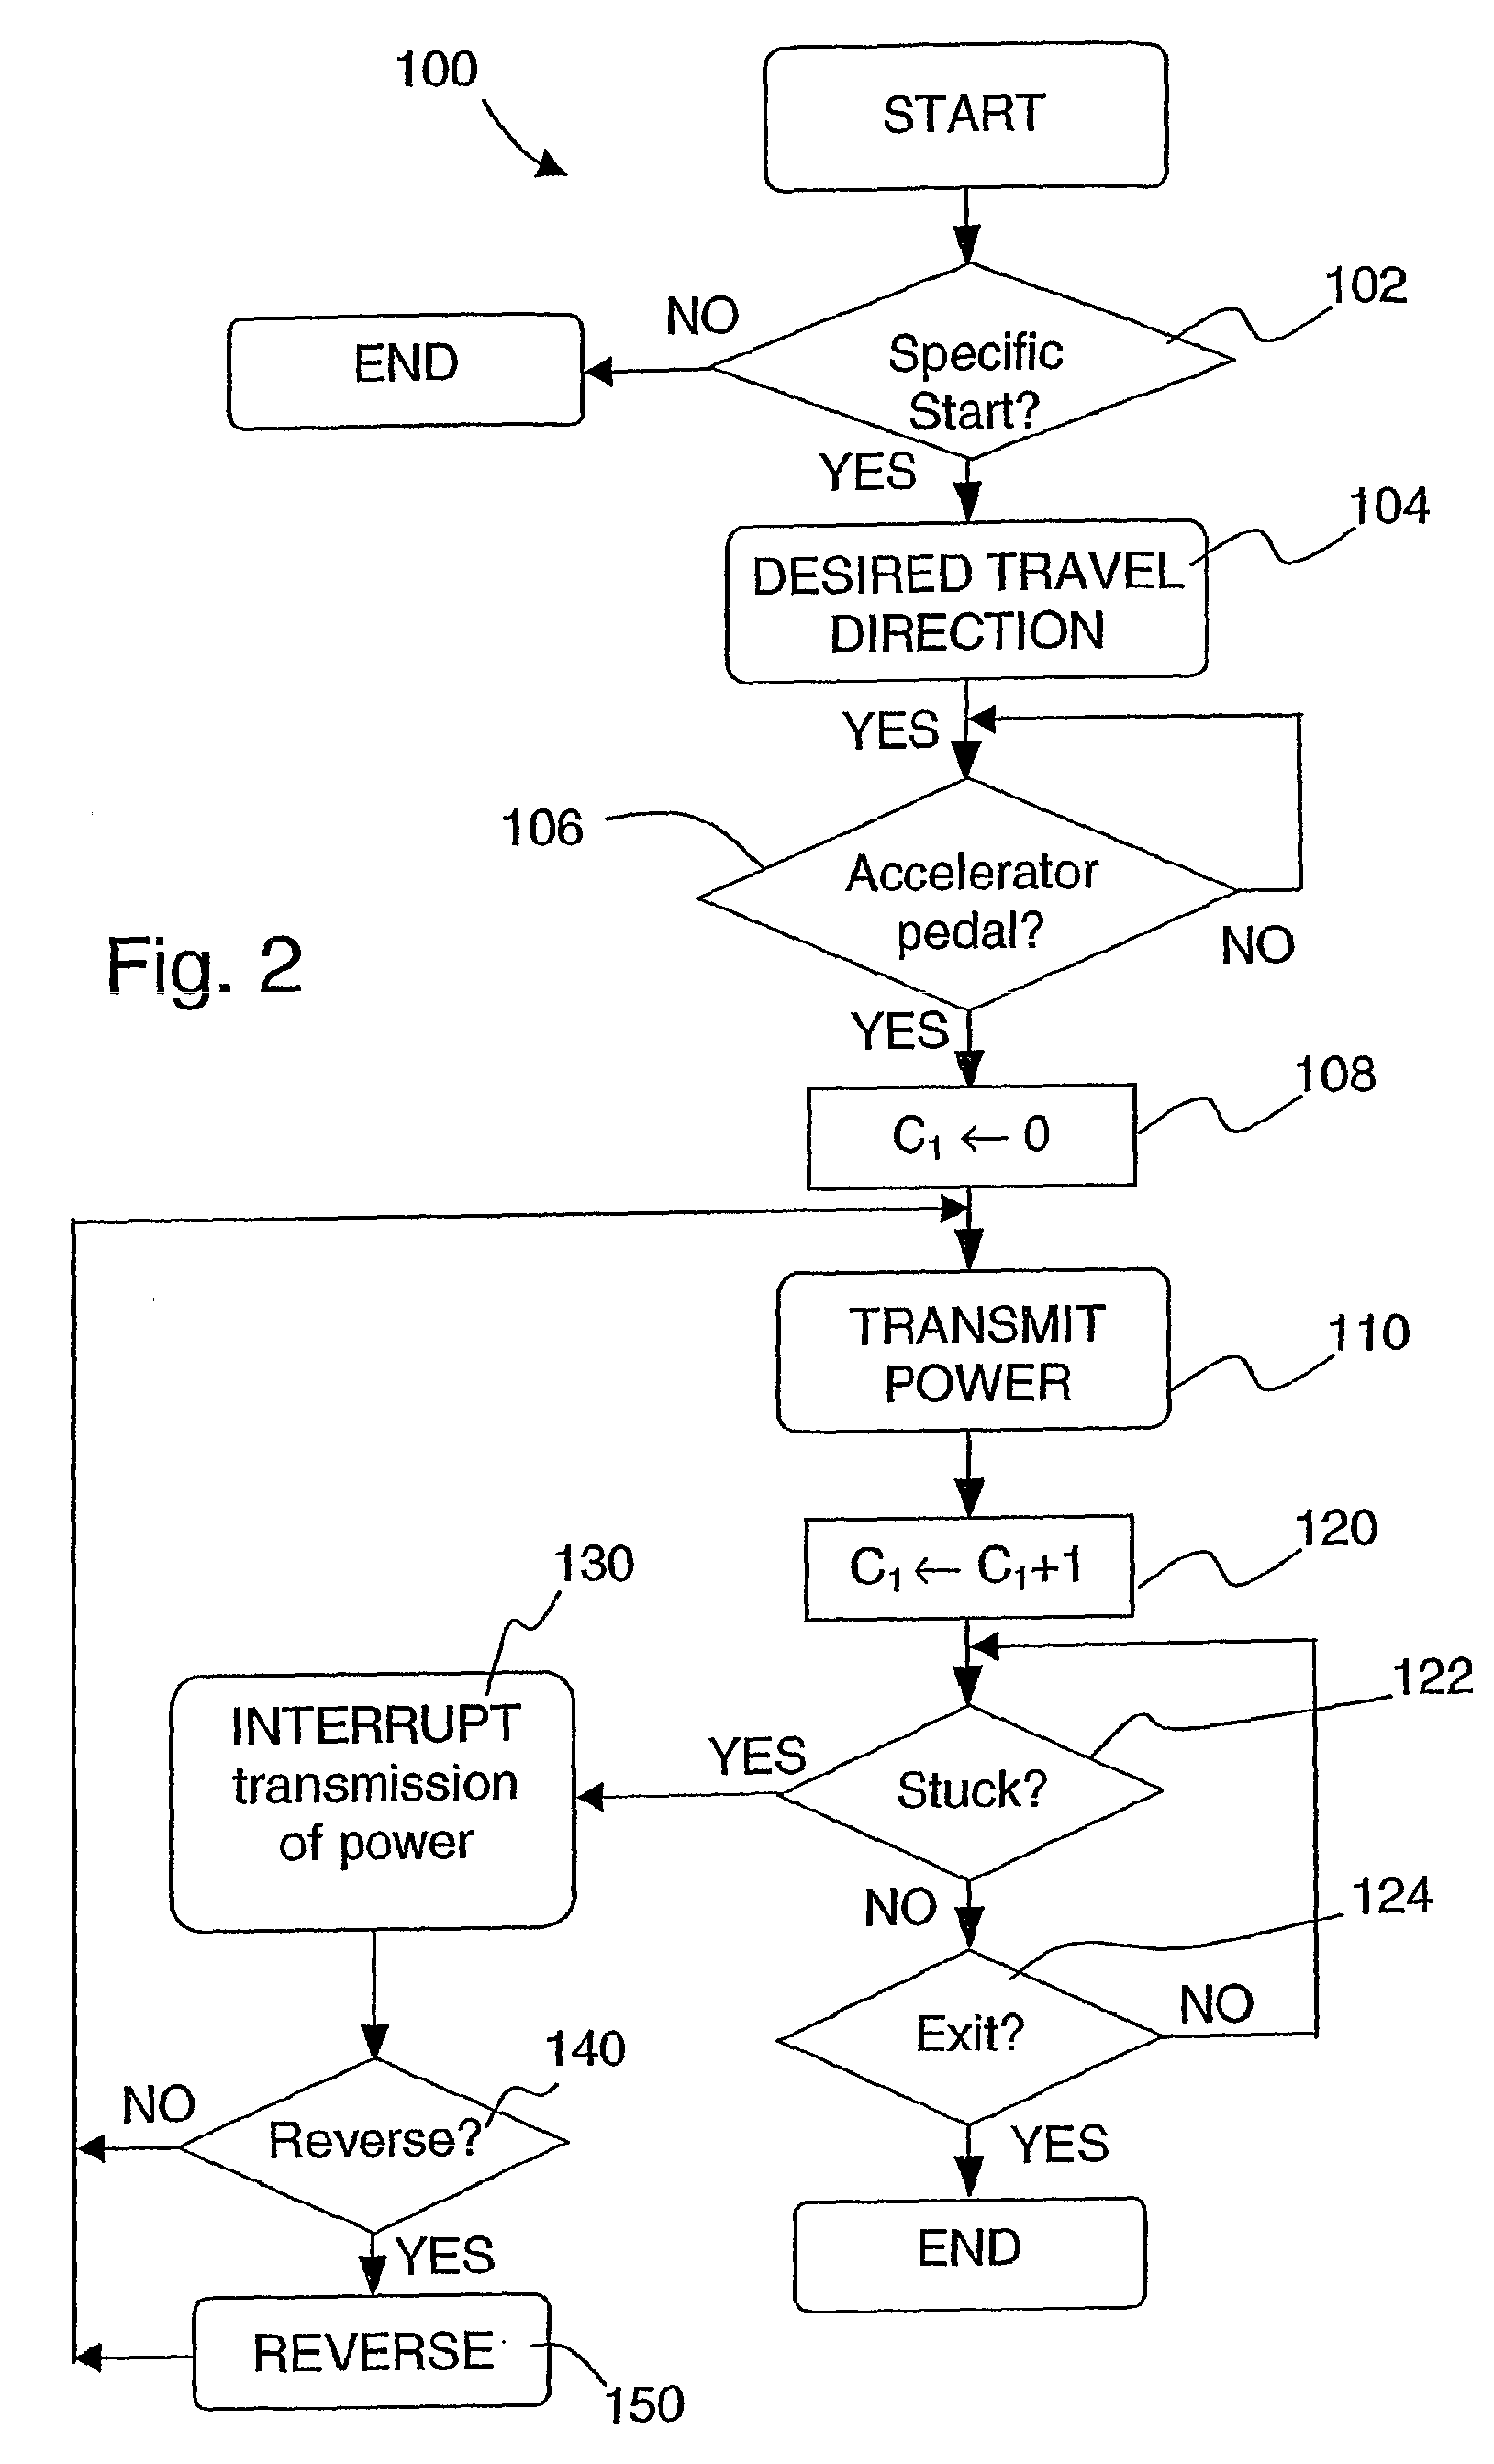 Method and arrangement for automated control of a vehicular drive train